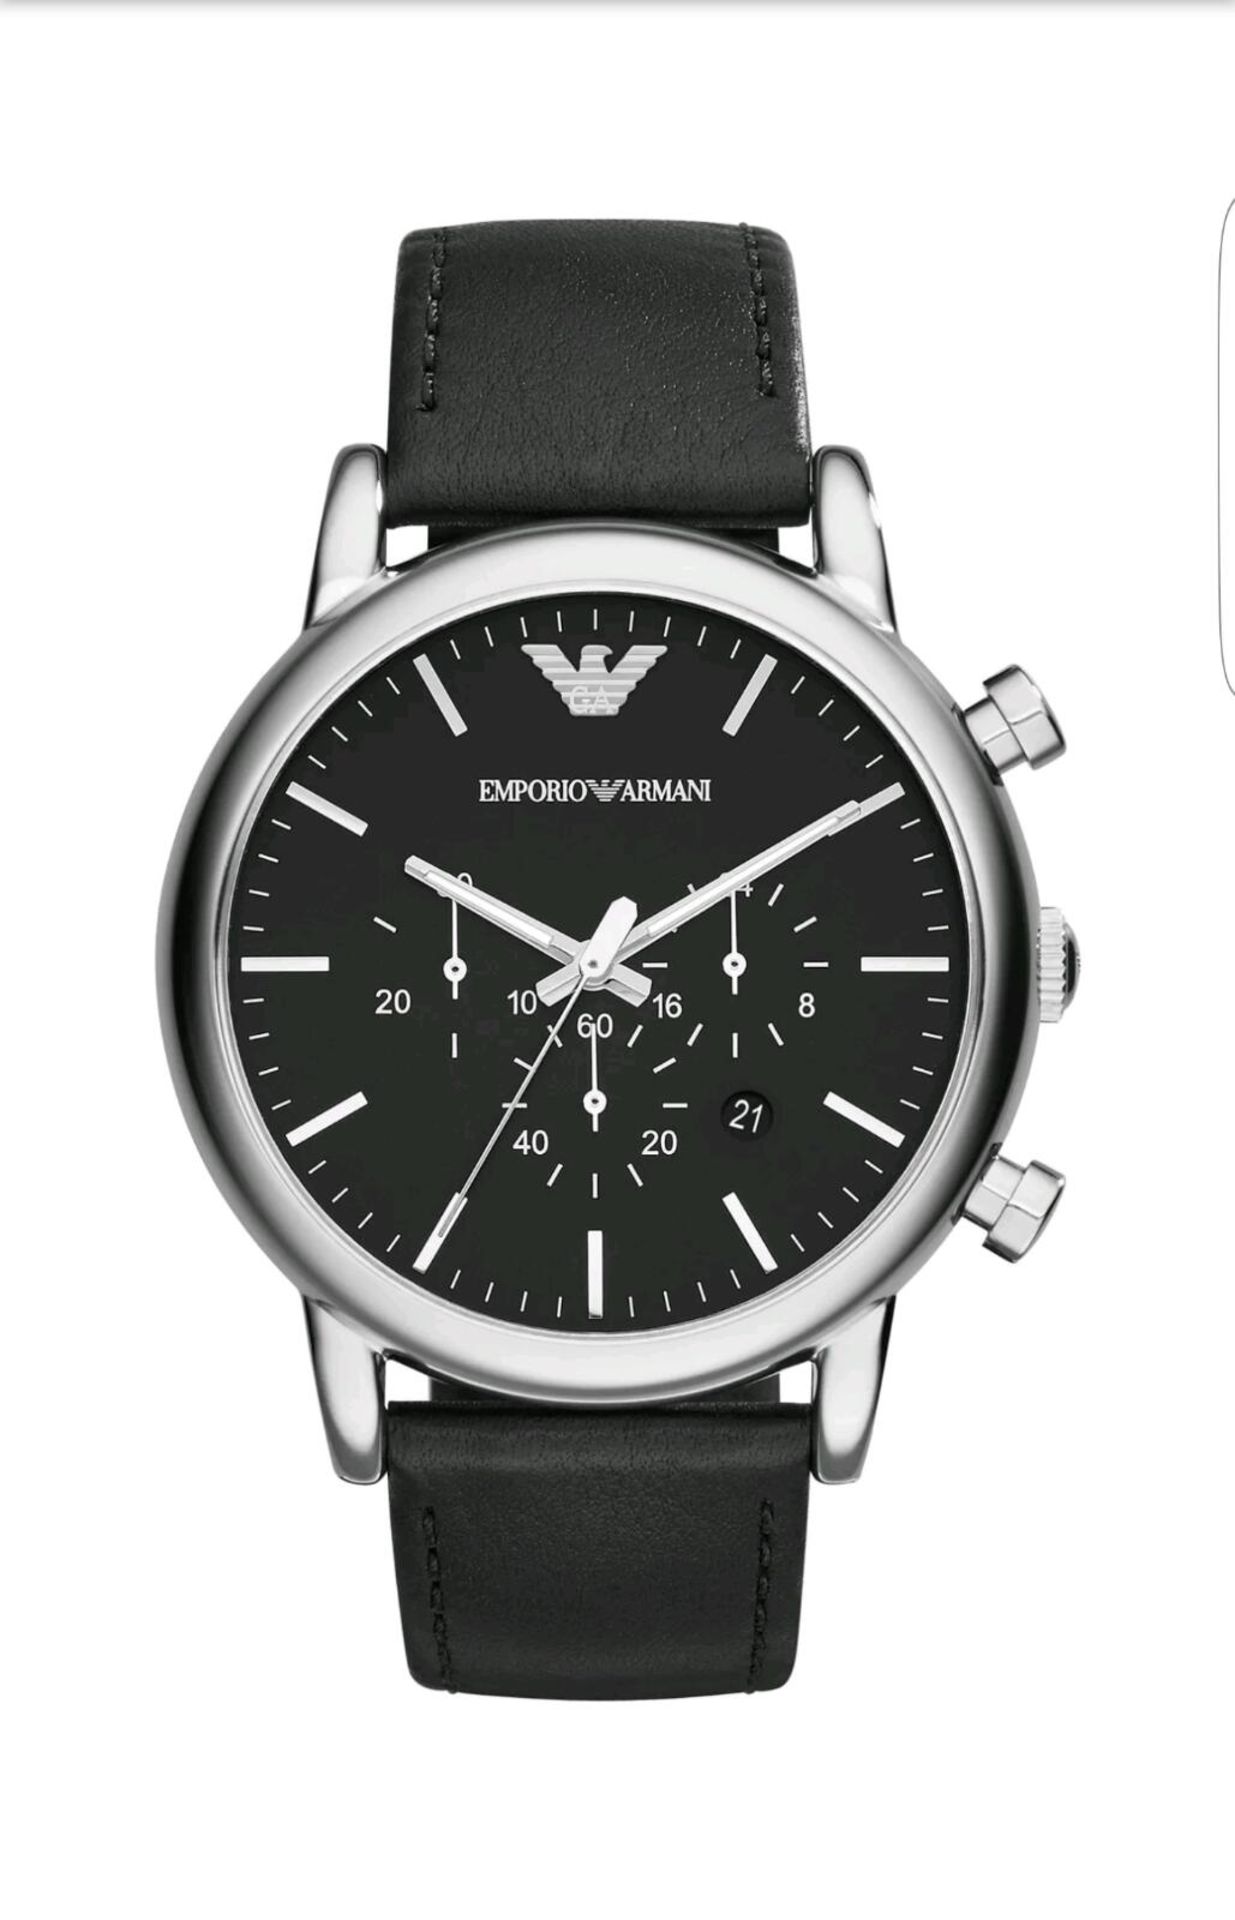 BRAND NEW EMPORIO ARMANI AR1828GENTS CLASSIC CHRONOGRAPH LEATHER STRAP WATCH , COMPLETE WITH